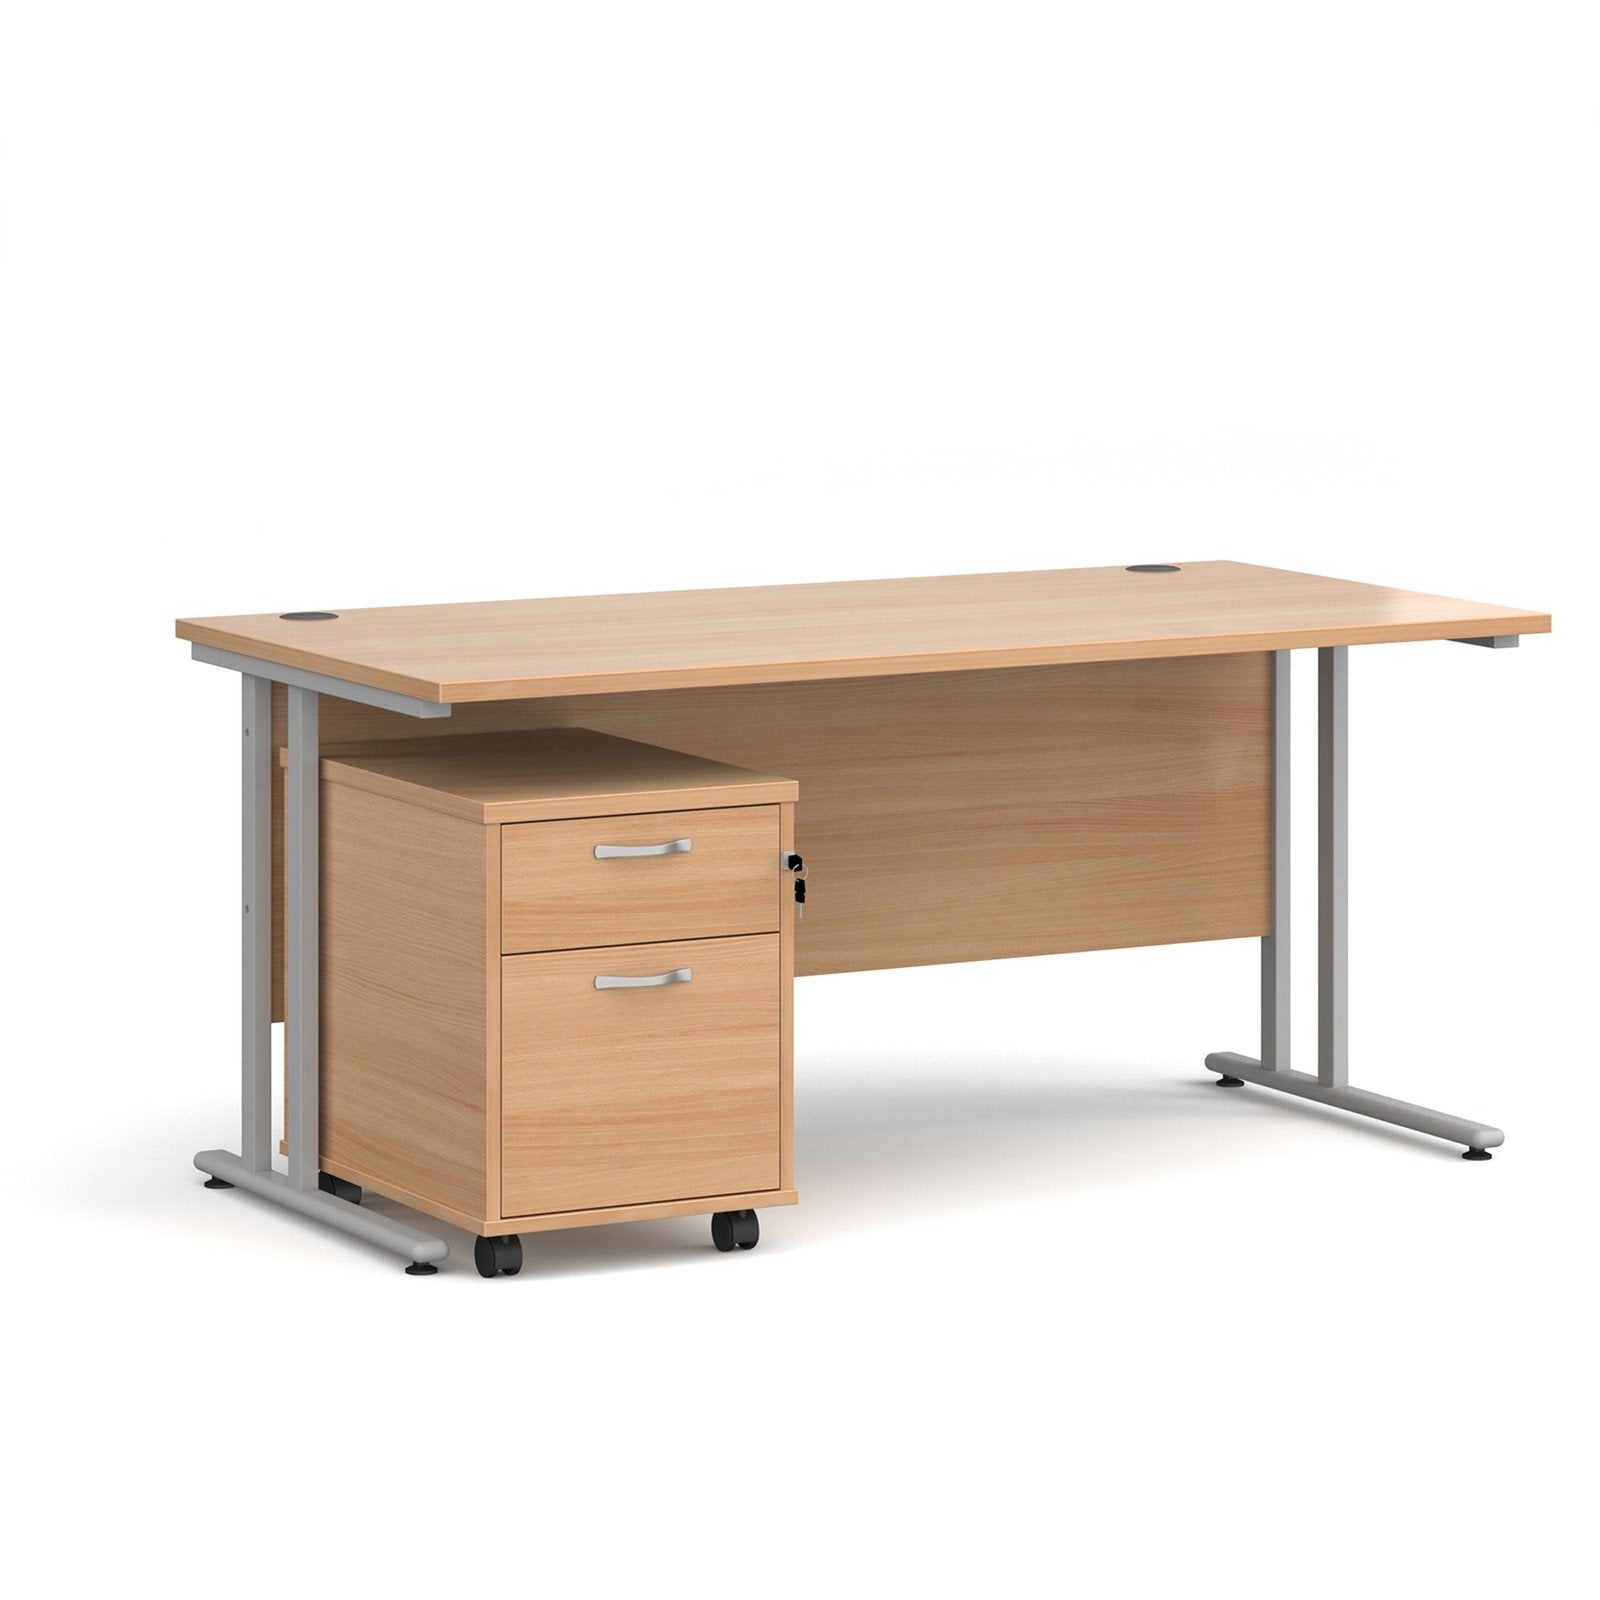 Maestro 25 cantilever leg straight desk 800 deep with 2 drawer mobile pedestal - Office Products Online